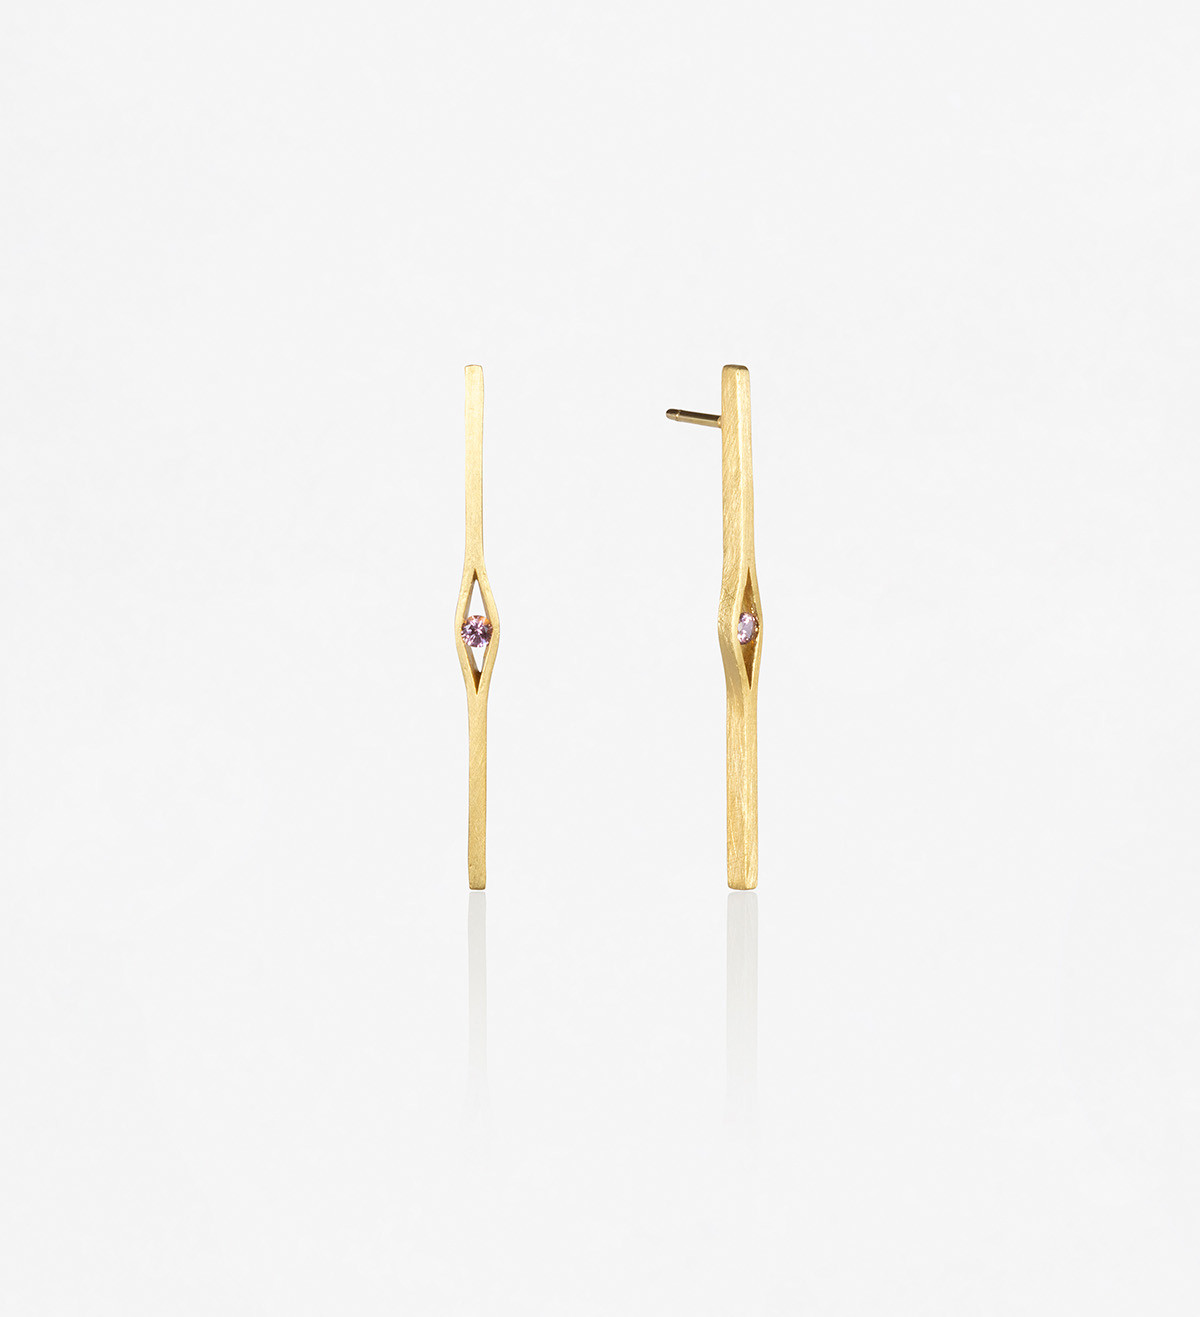 18k gold earrings with pink Wennick-Lefèvre sapphire 0,14ct